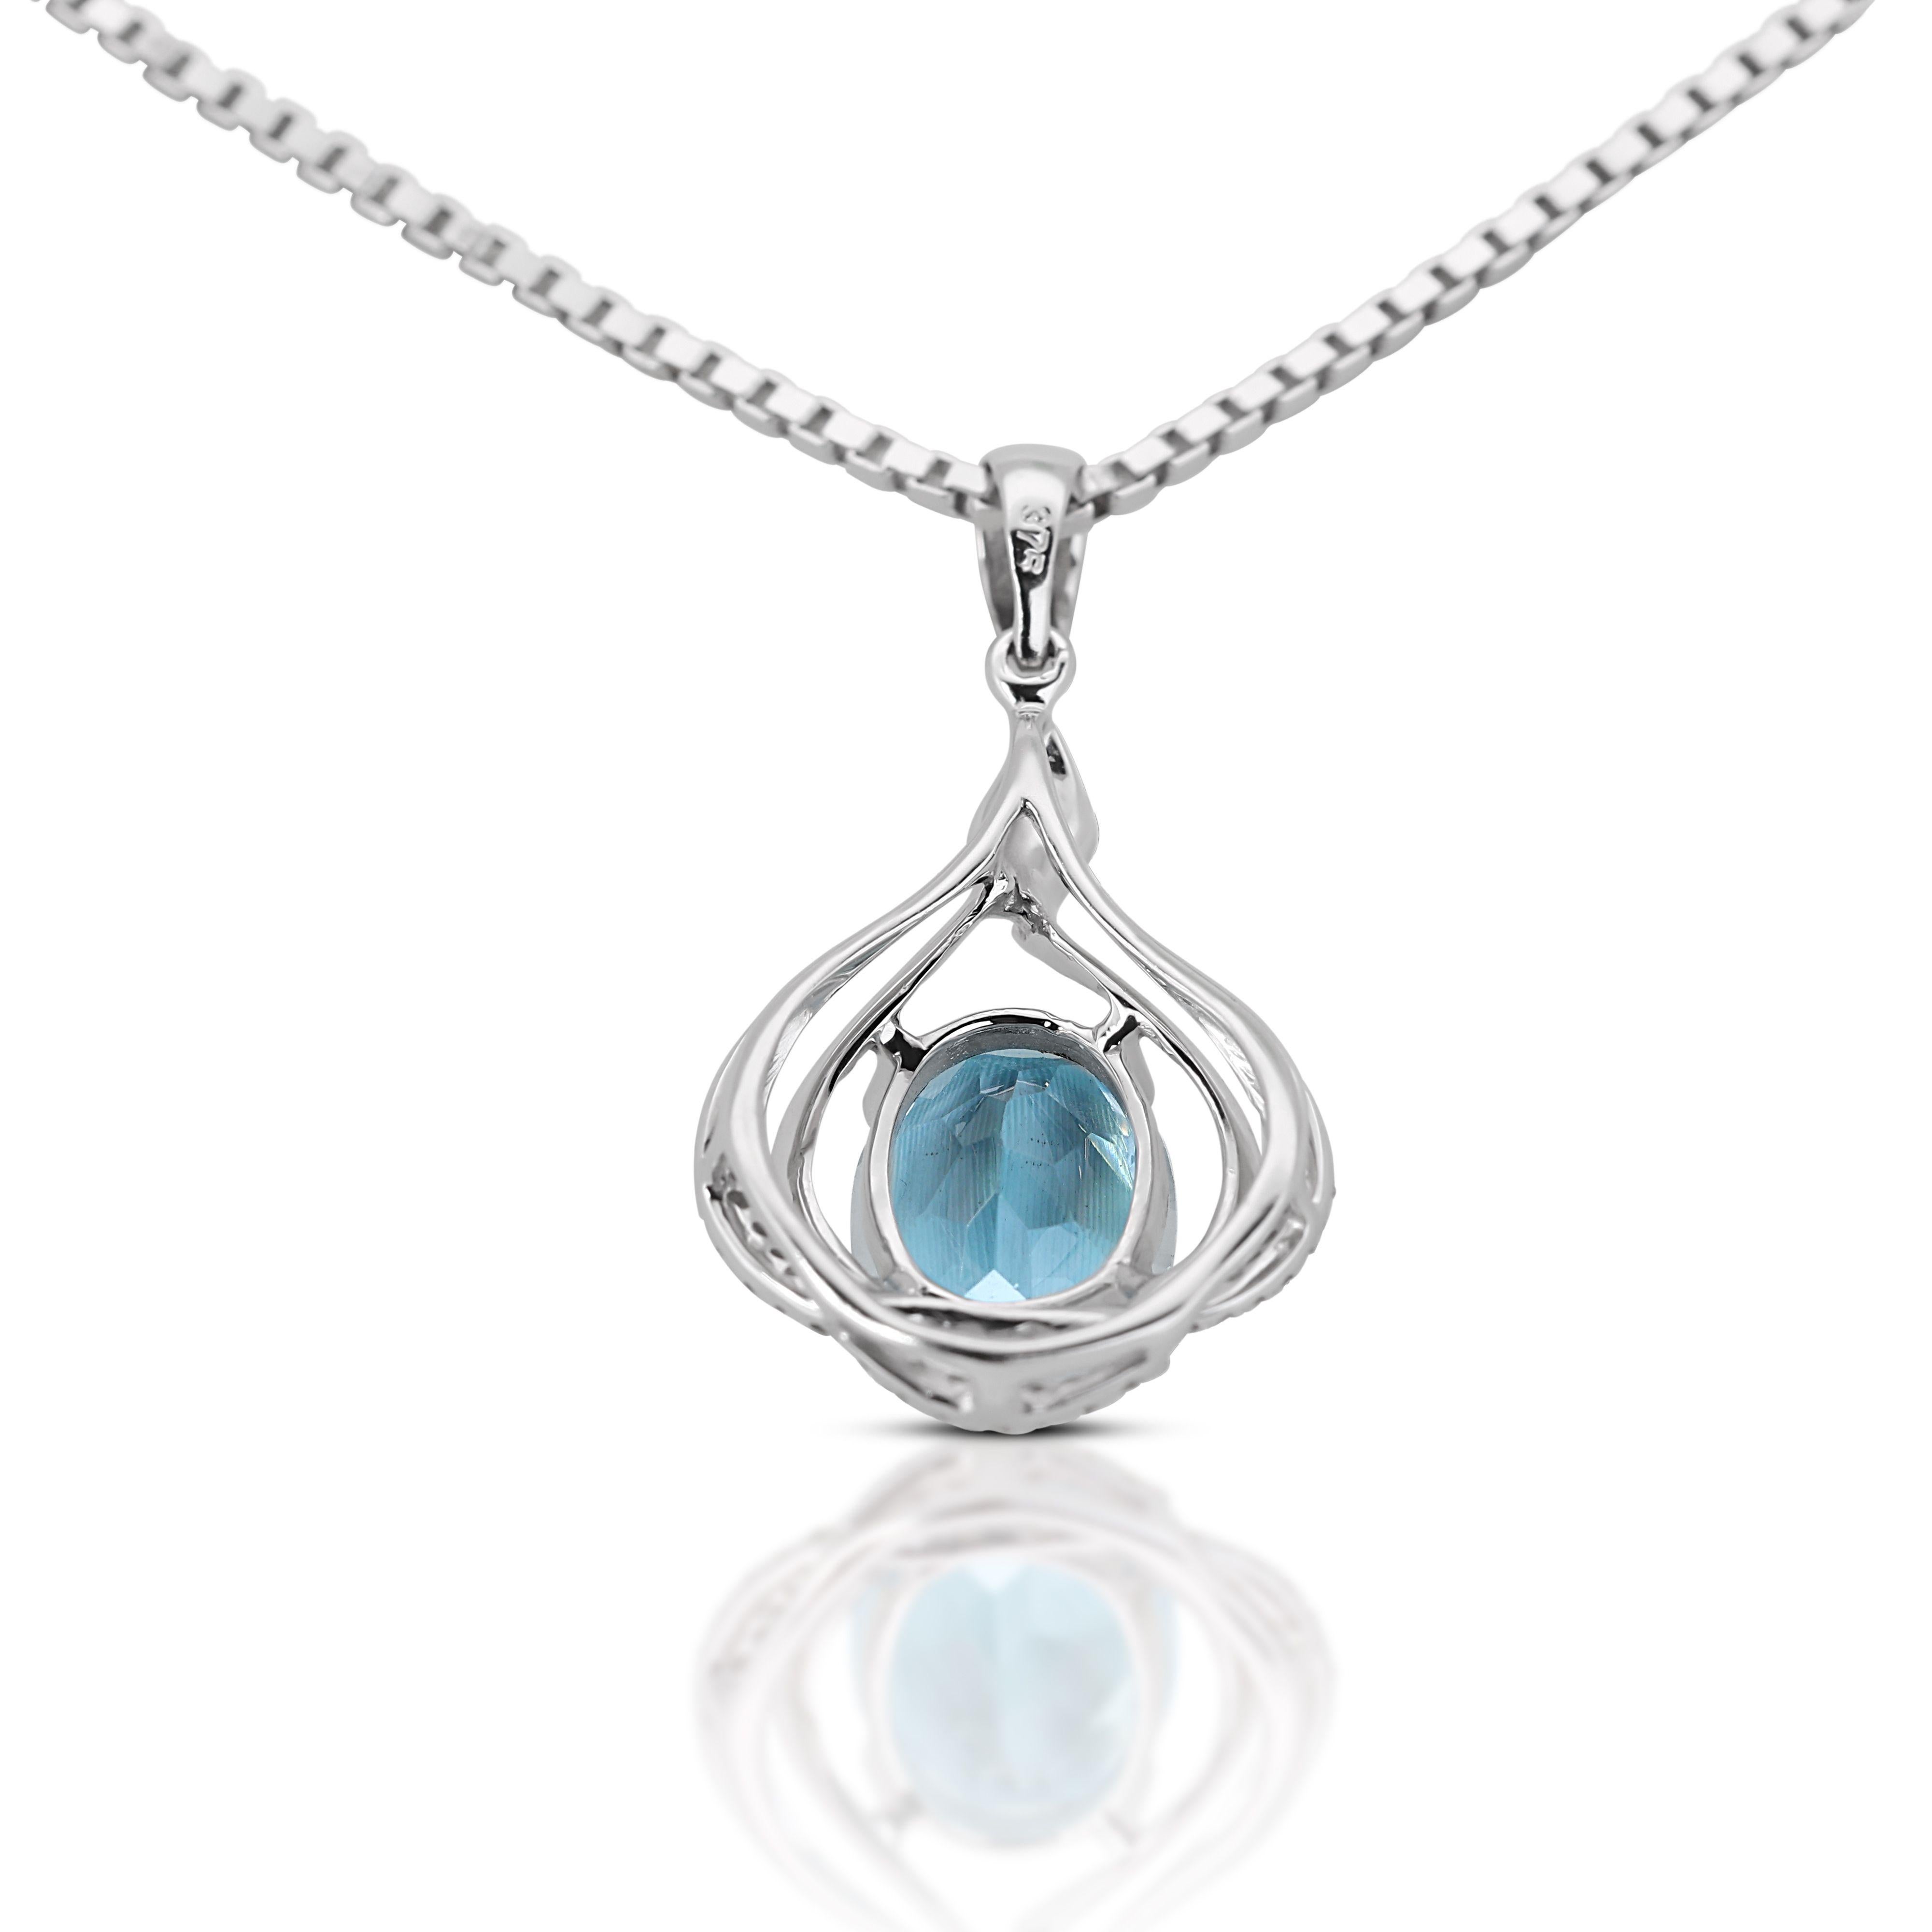 Stunning 10k White Gold Necklace with 3.16 Ct Natural Diamonds and Topaz For Sale 1